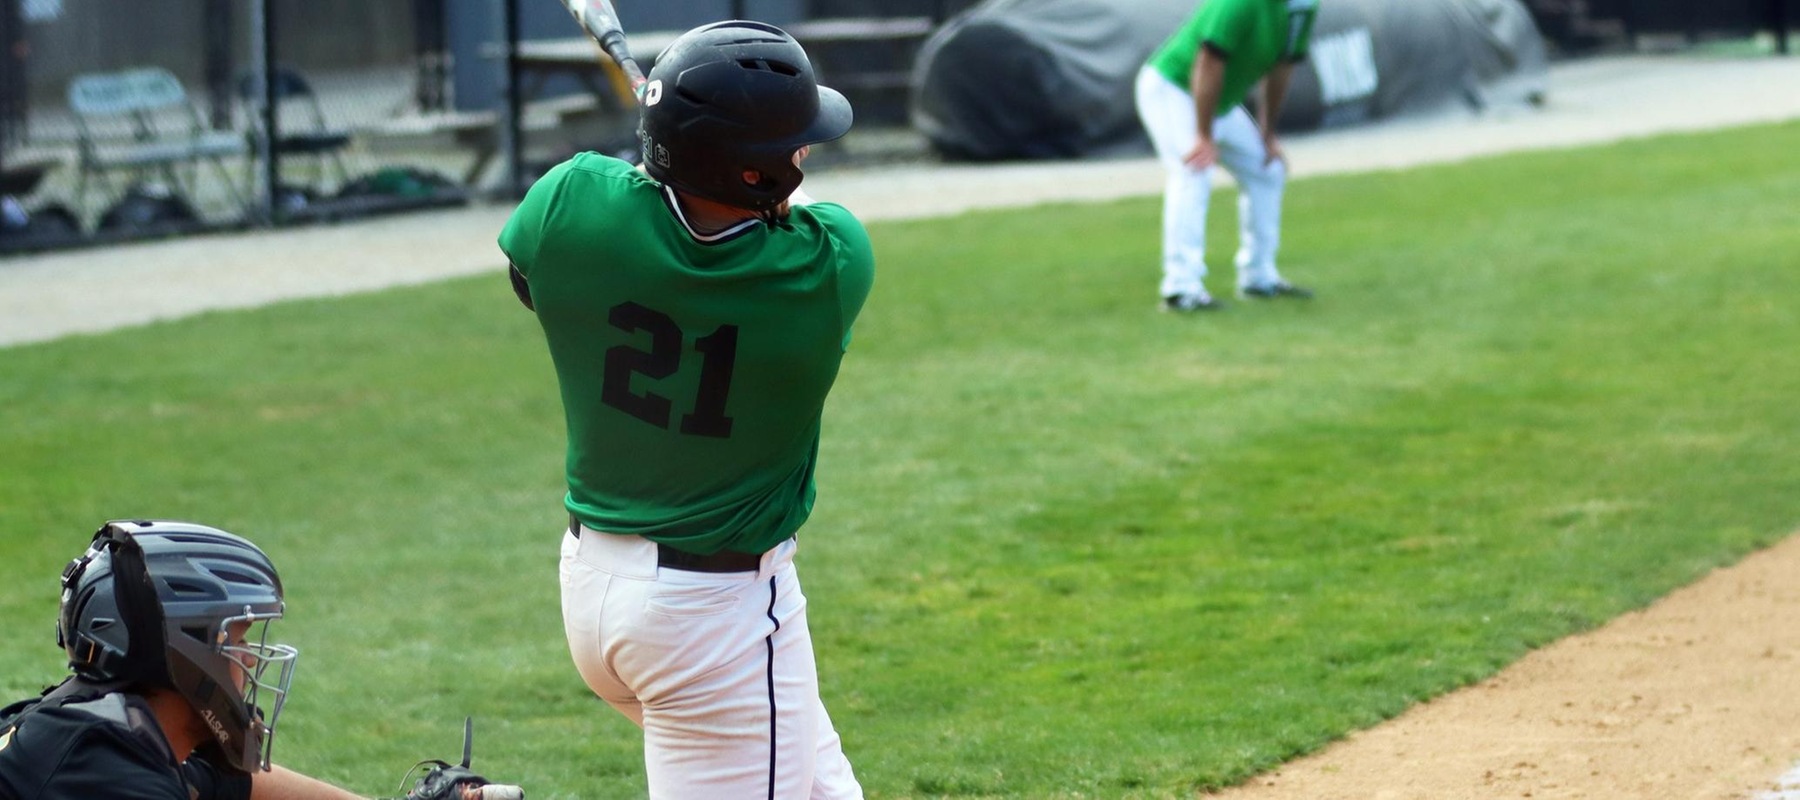 File Photo of Quintin Ivy who batted 4-for-7 with a double and 3 RBI in the DH at Post. Copyright 2021; Wilmington University. All rights reserved. Photo by Erin Harvey.